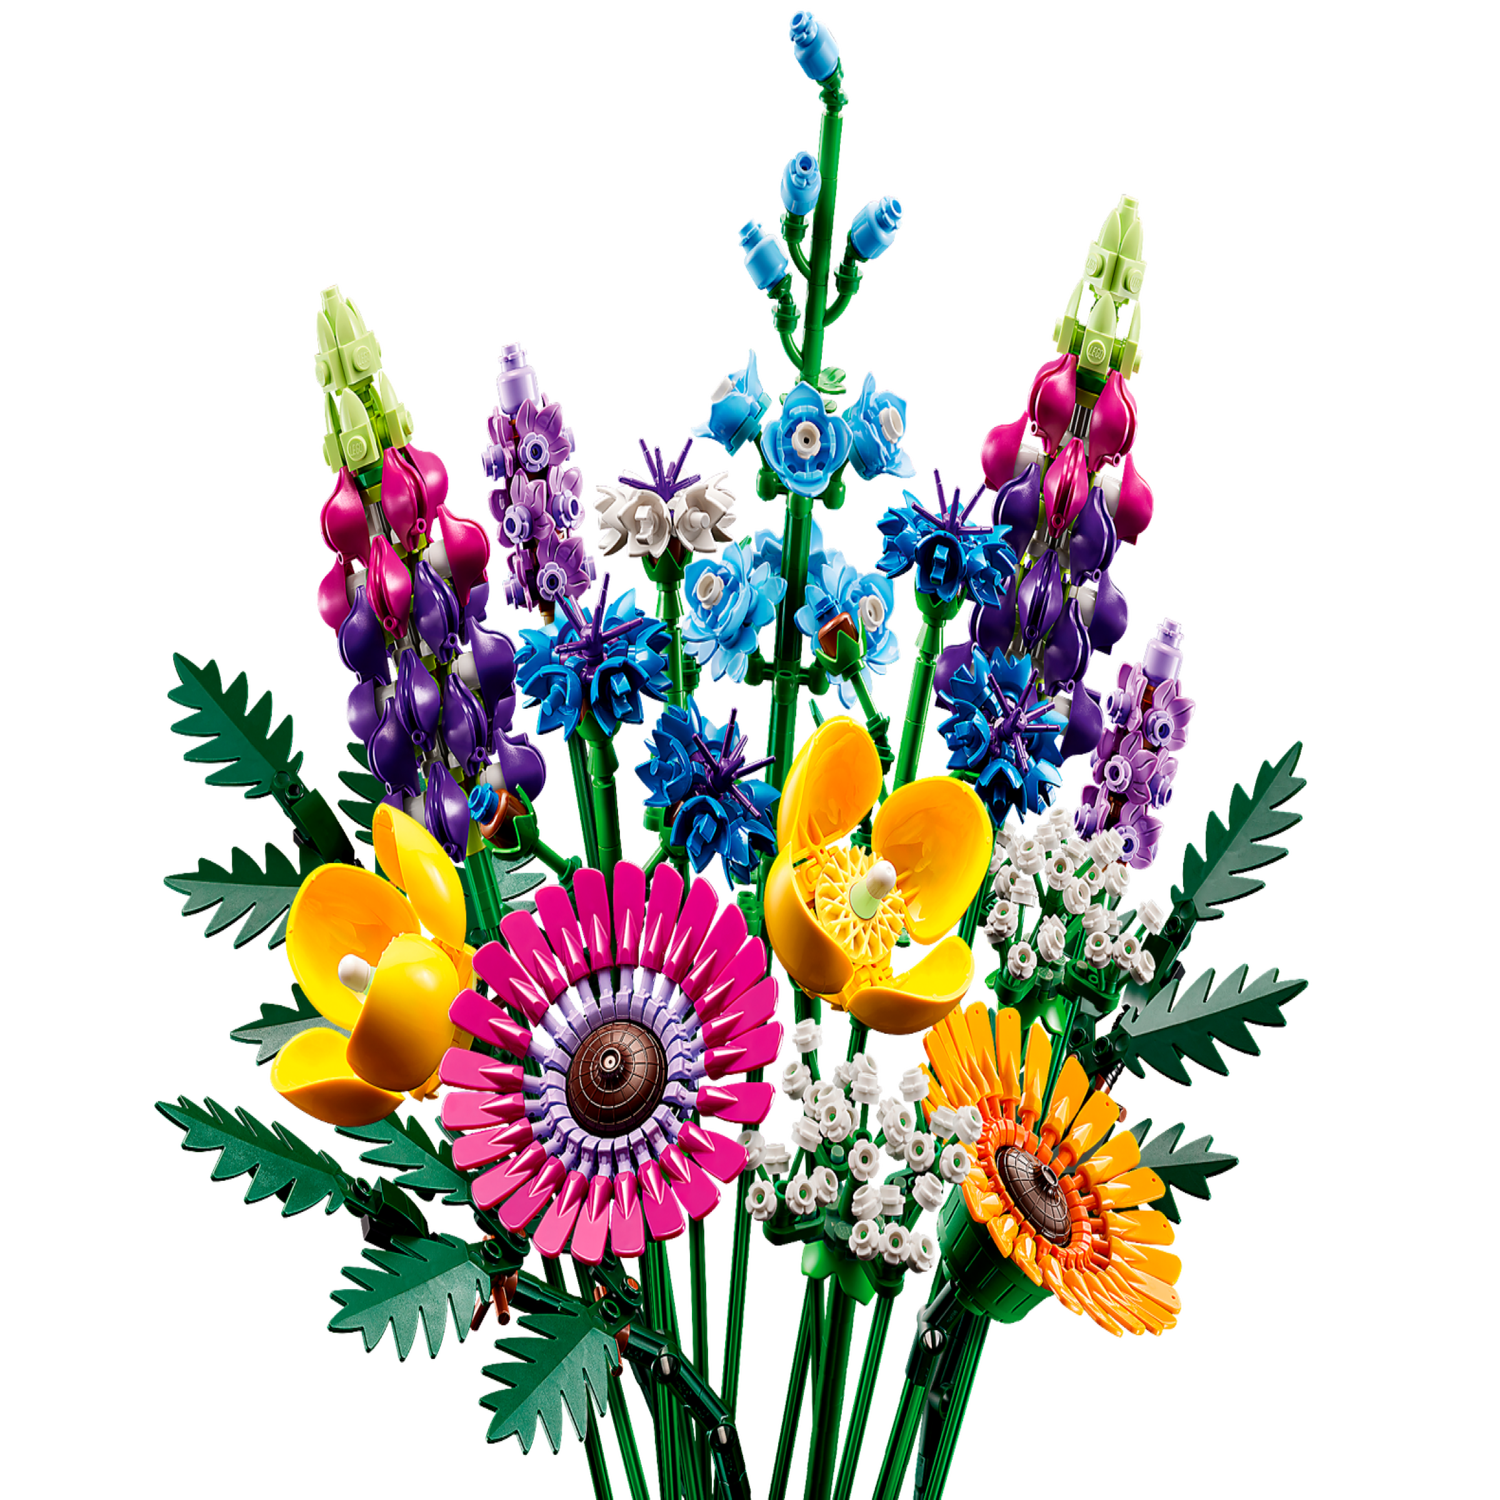 Wildflower Bouquet 10313 | The Botanical Collection - LEGO